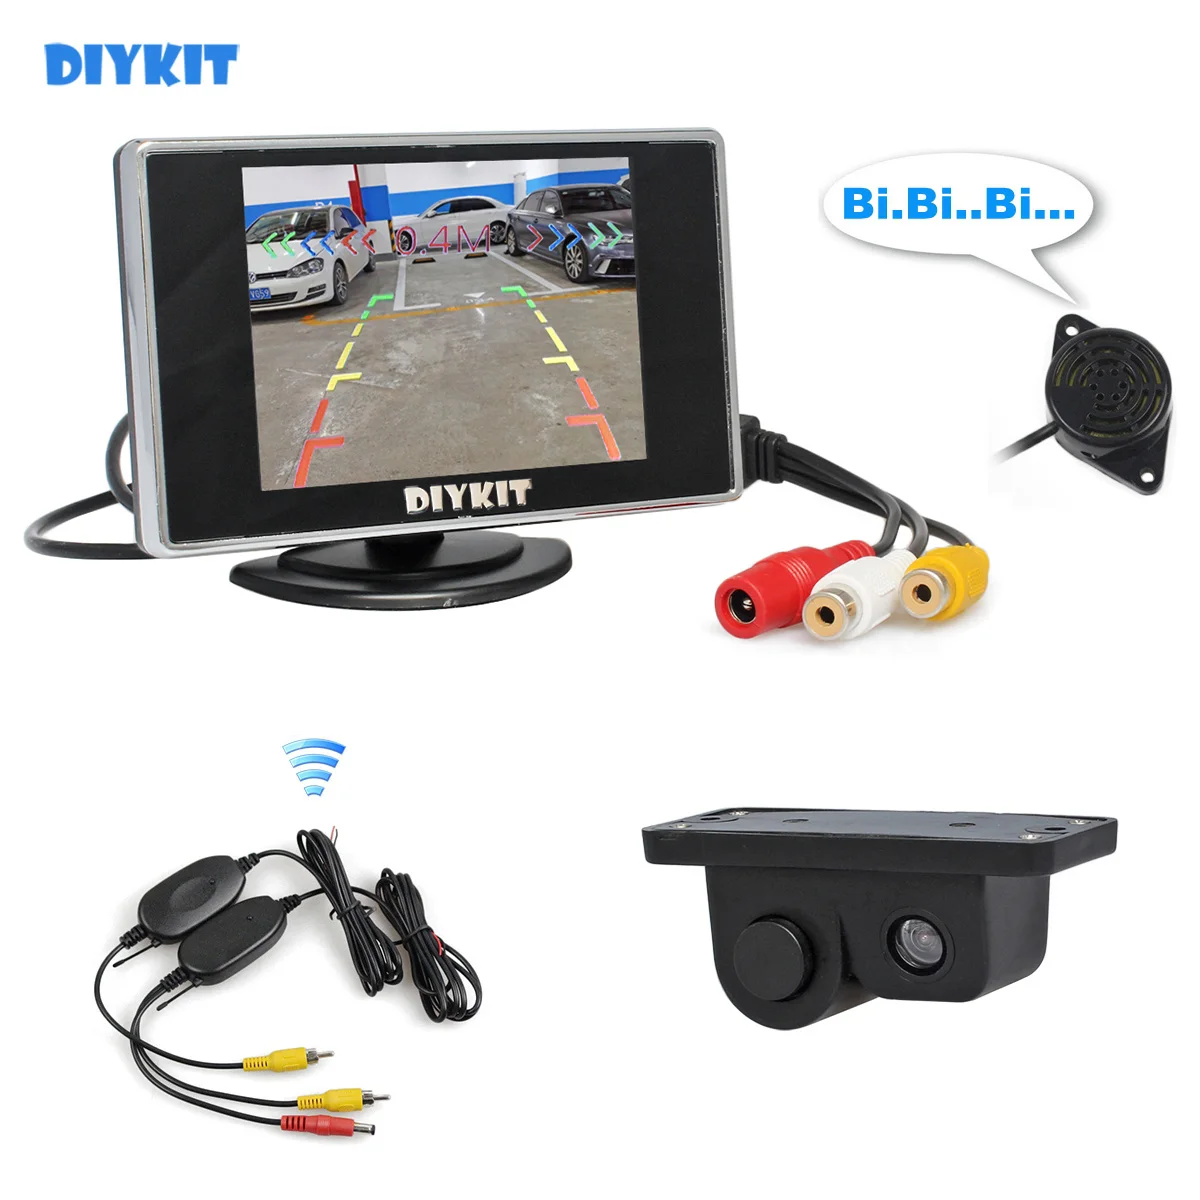 

DIYKIT Wireless 3.5" Car Rearview Monitor + Rear View Backup Camera with Radar Sensor All-in-one Parking Assistance System